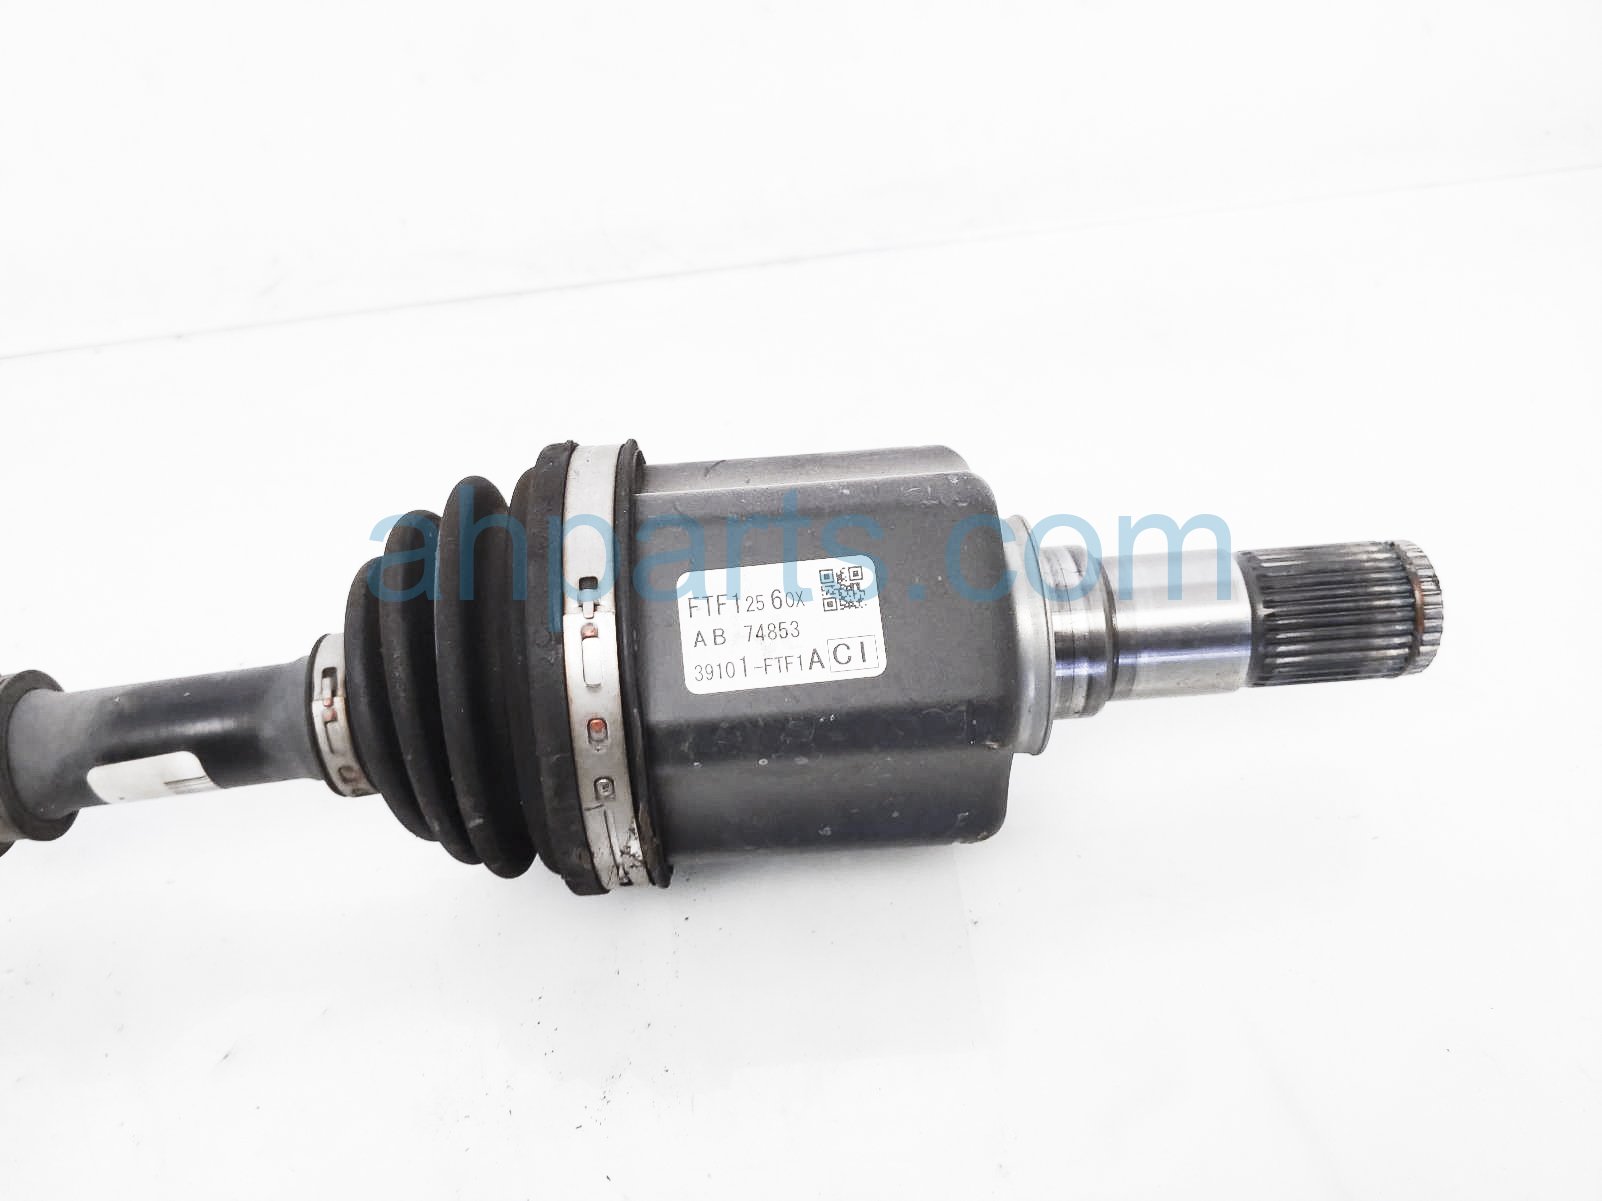 Sold 2019 Mazda CX-9 Front Driver Axle Drive Shaft FTF1-25-60X